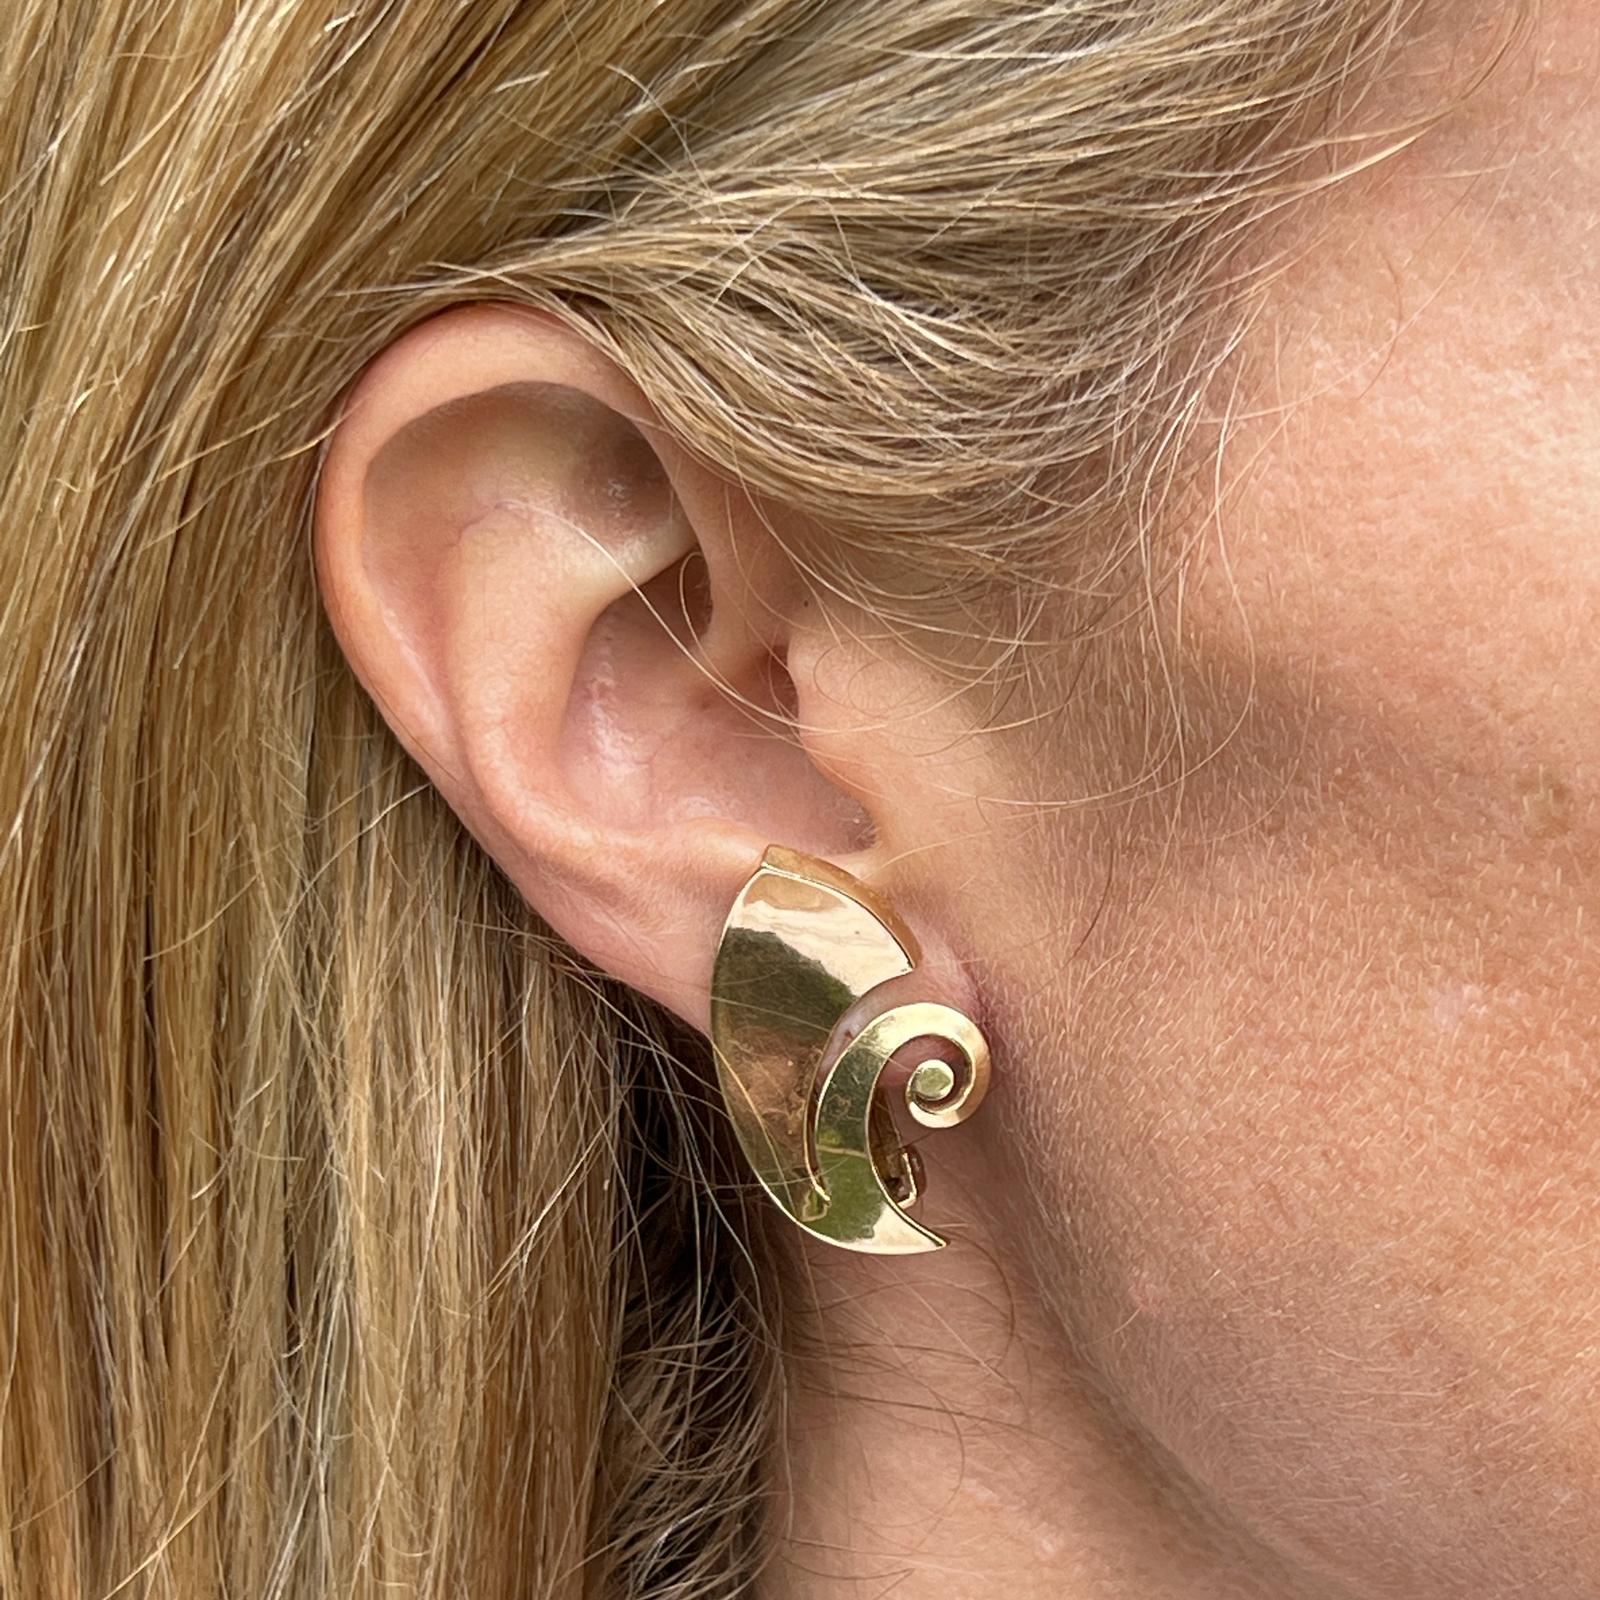 Retro swirl estate earrings handcrafted in 14 karat yellow gold. The high polish all gold earrings are light weight and measure 1.25 x .70 inches with clip backs (posts can be added). Great for everyday wear. 